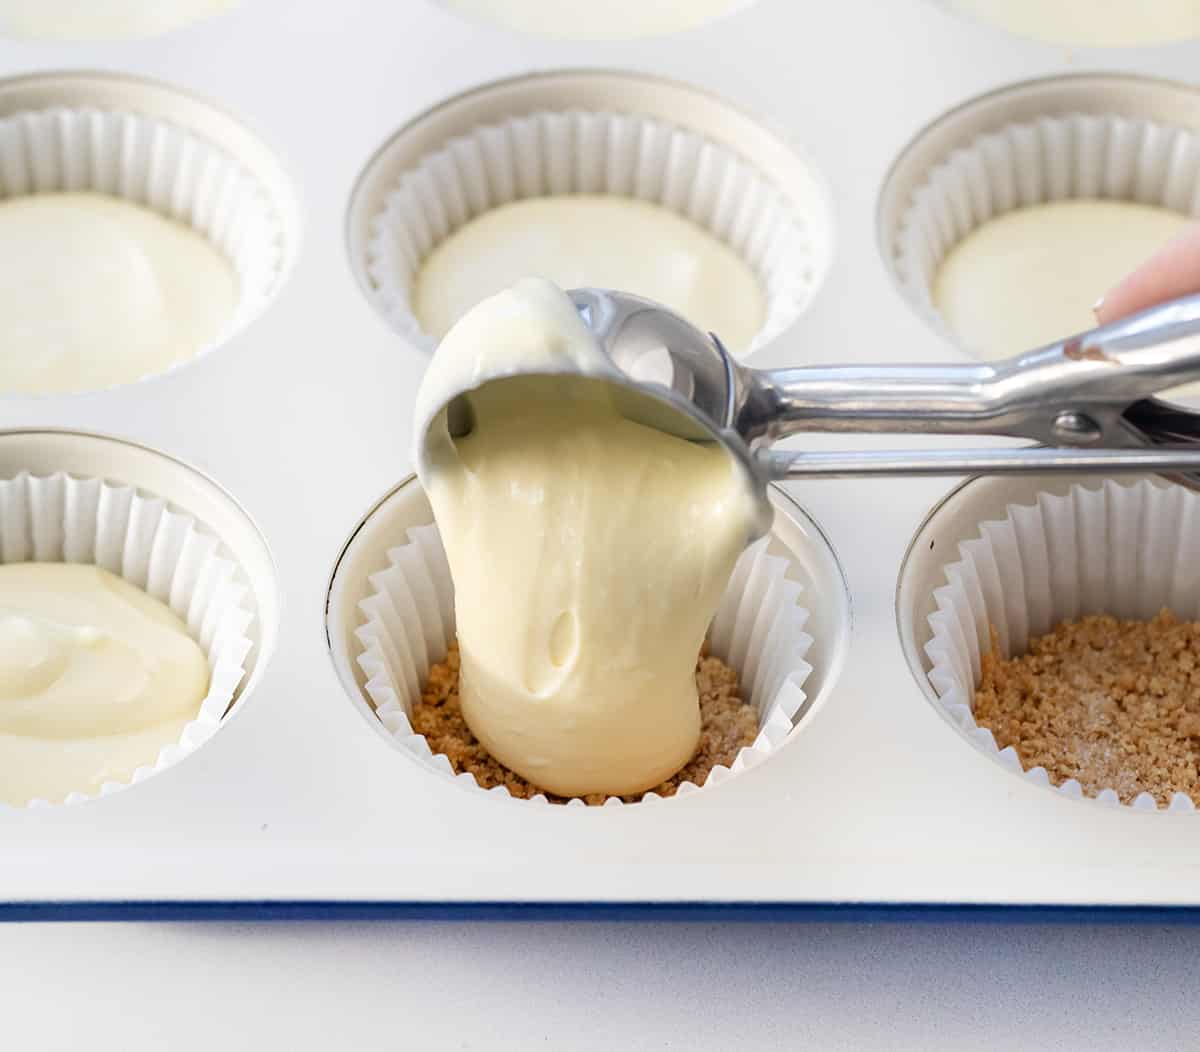 Scooping cheesecake batter into cups before baking.